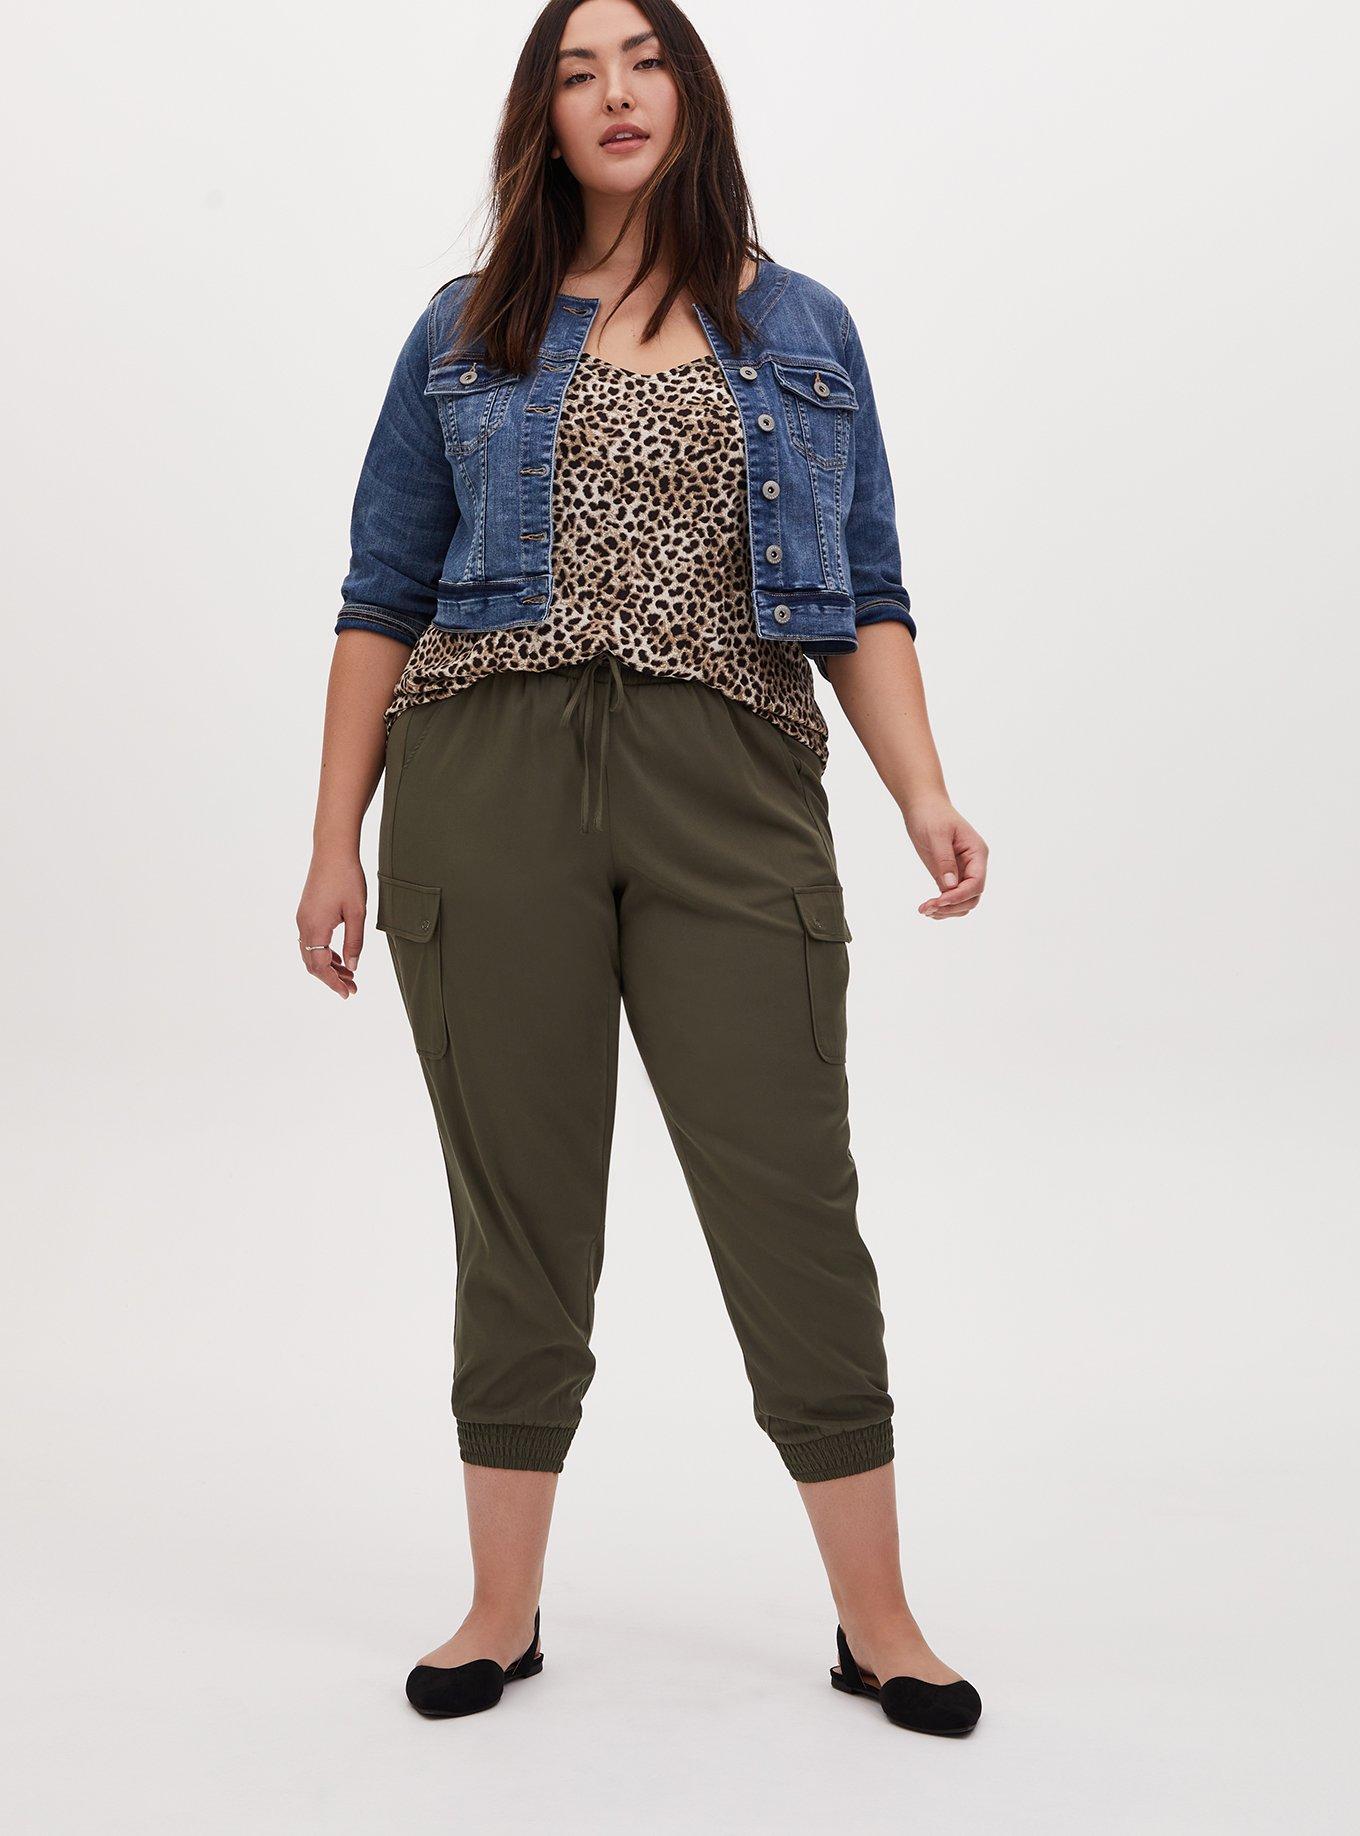 Plus Size - Relaxed Fit Jogger - Challis Olive Green - Torrid